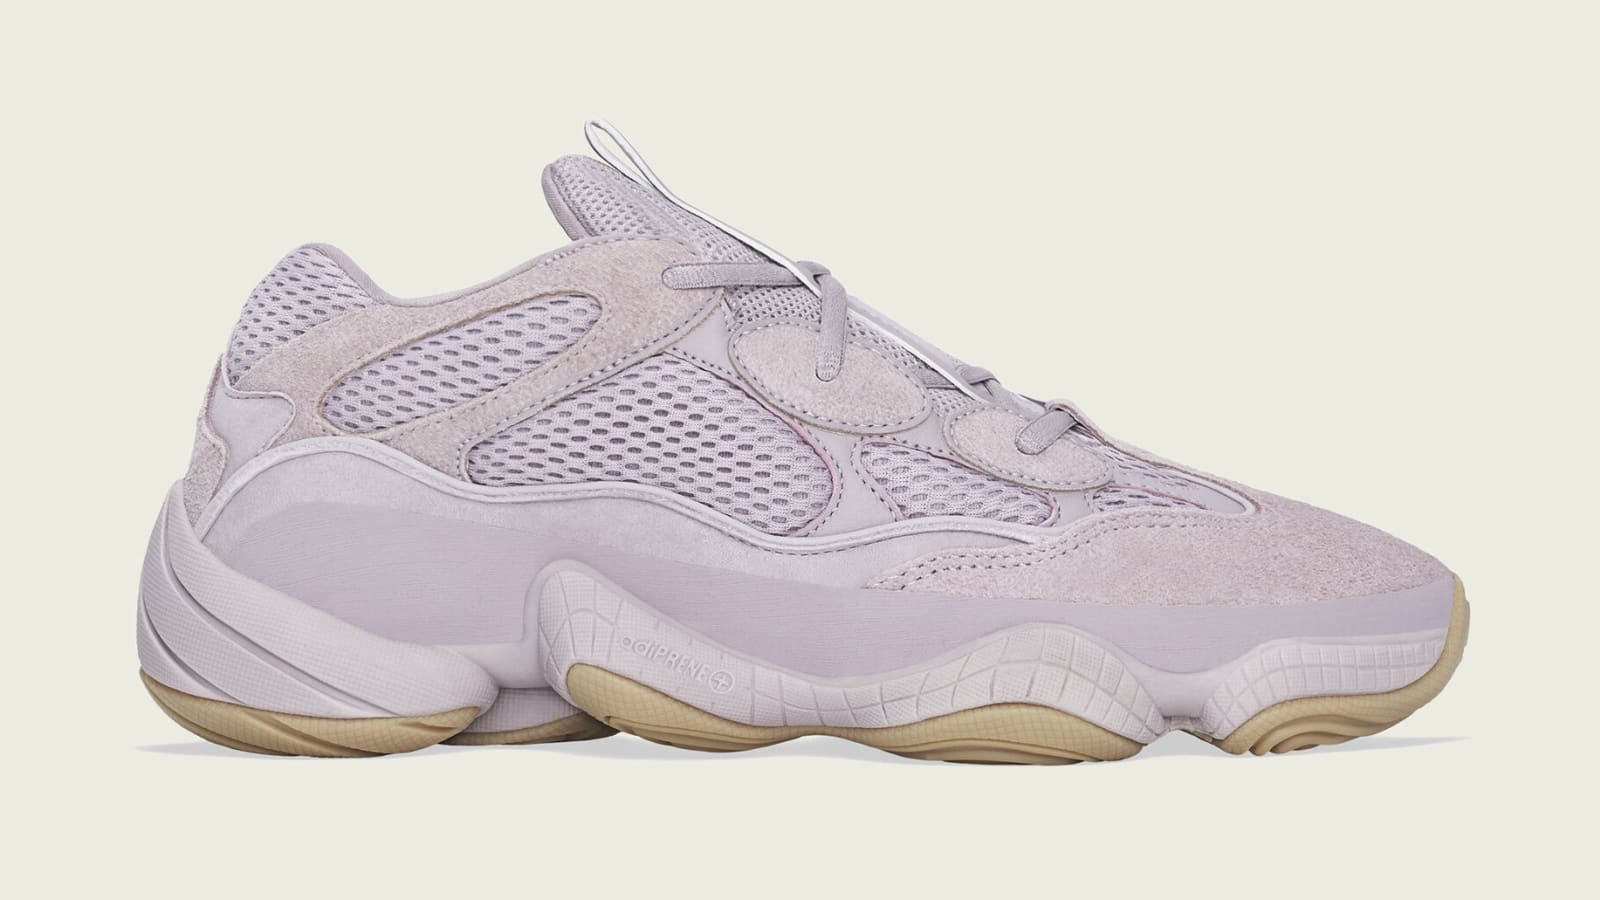 Adidas Yeezy 500 &quot;St Vision&quot; Officially Unveiled: Release Details